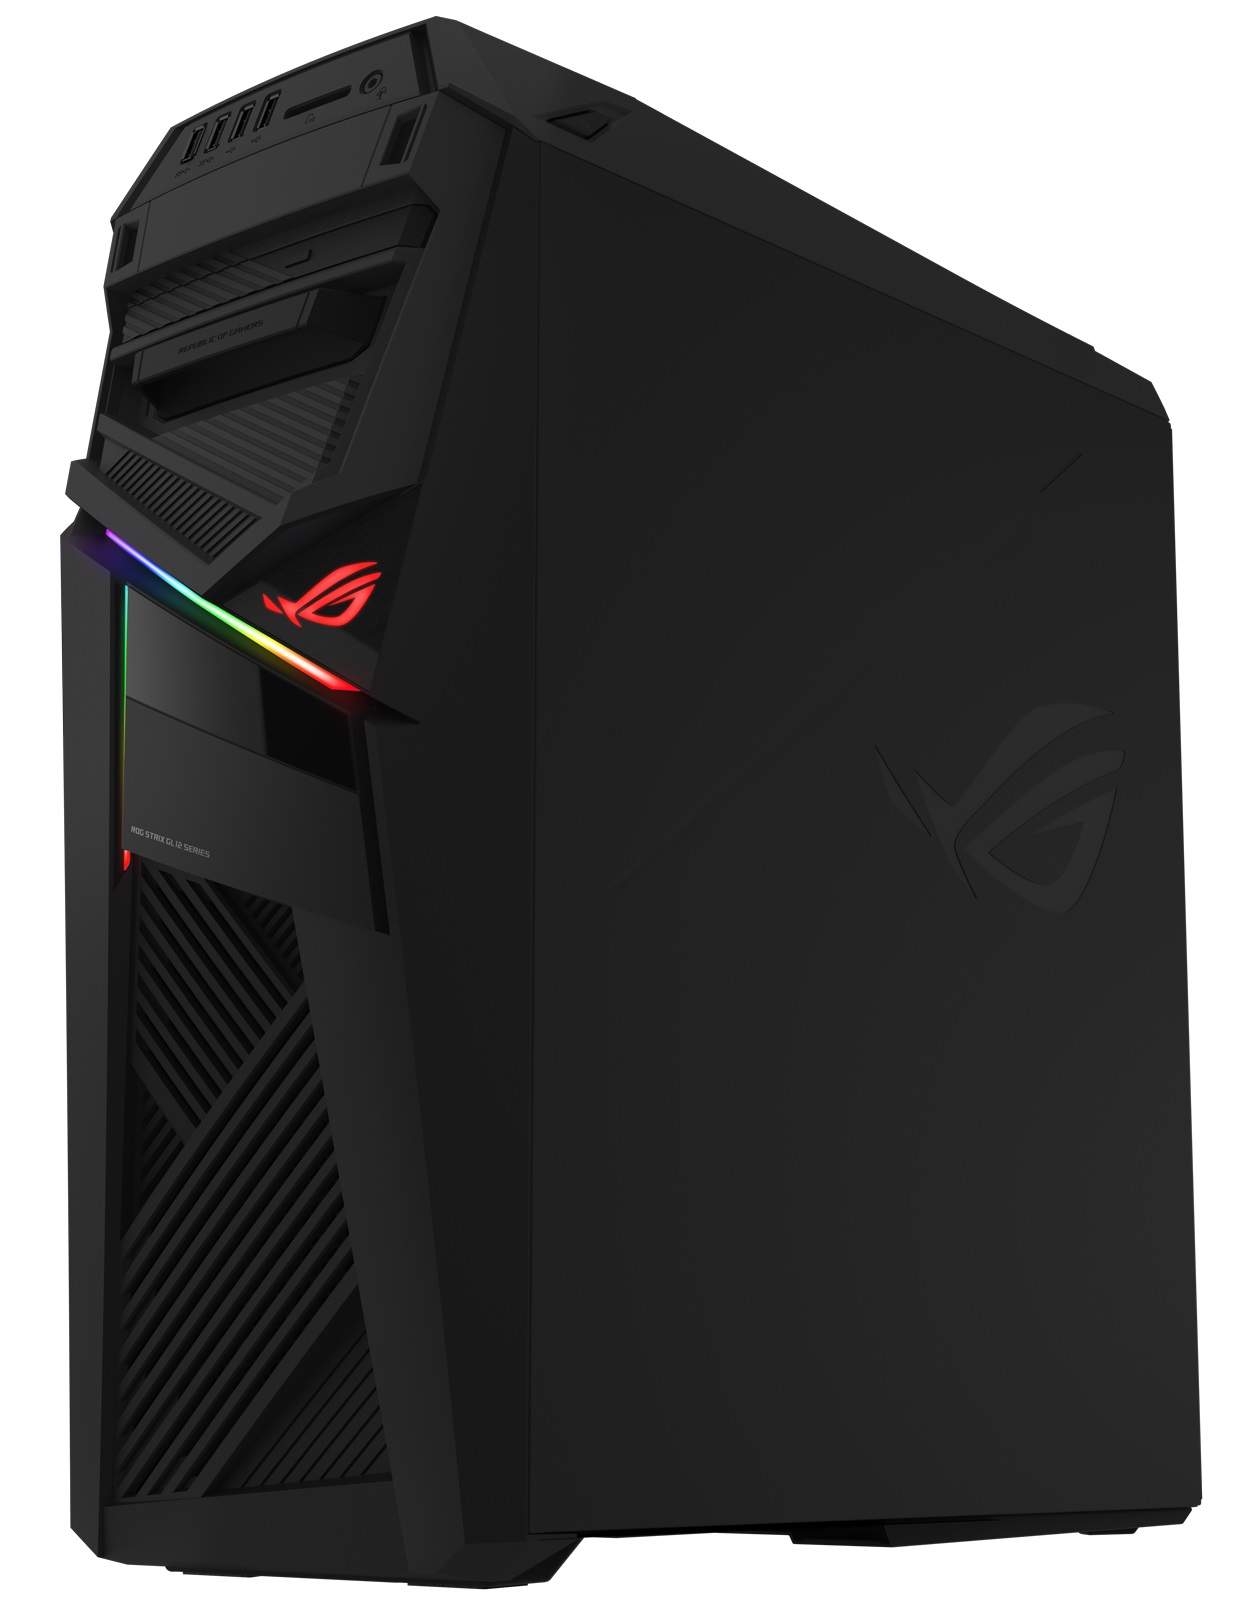 ASUS ROG reveals a range of new products at CES